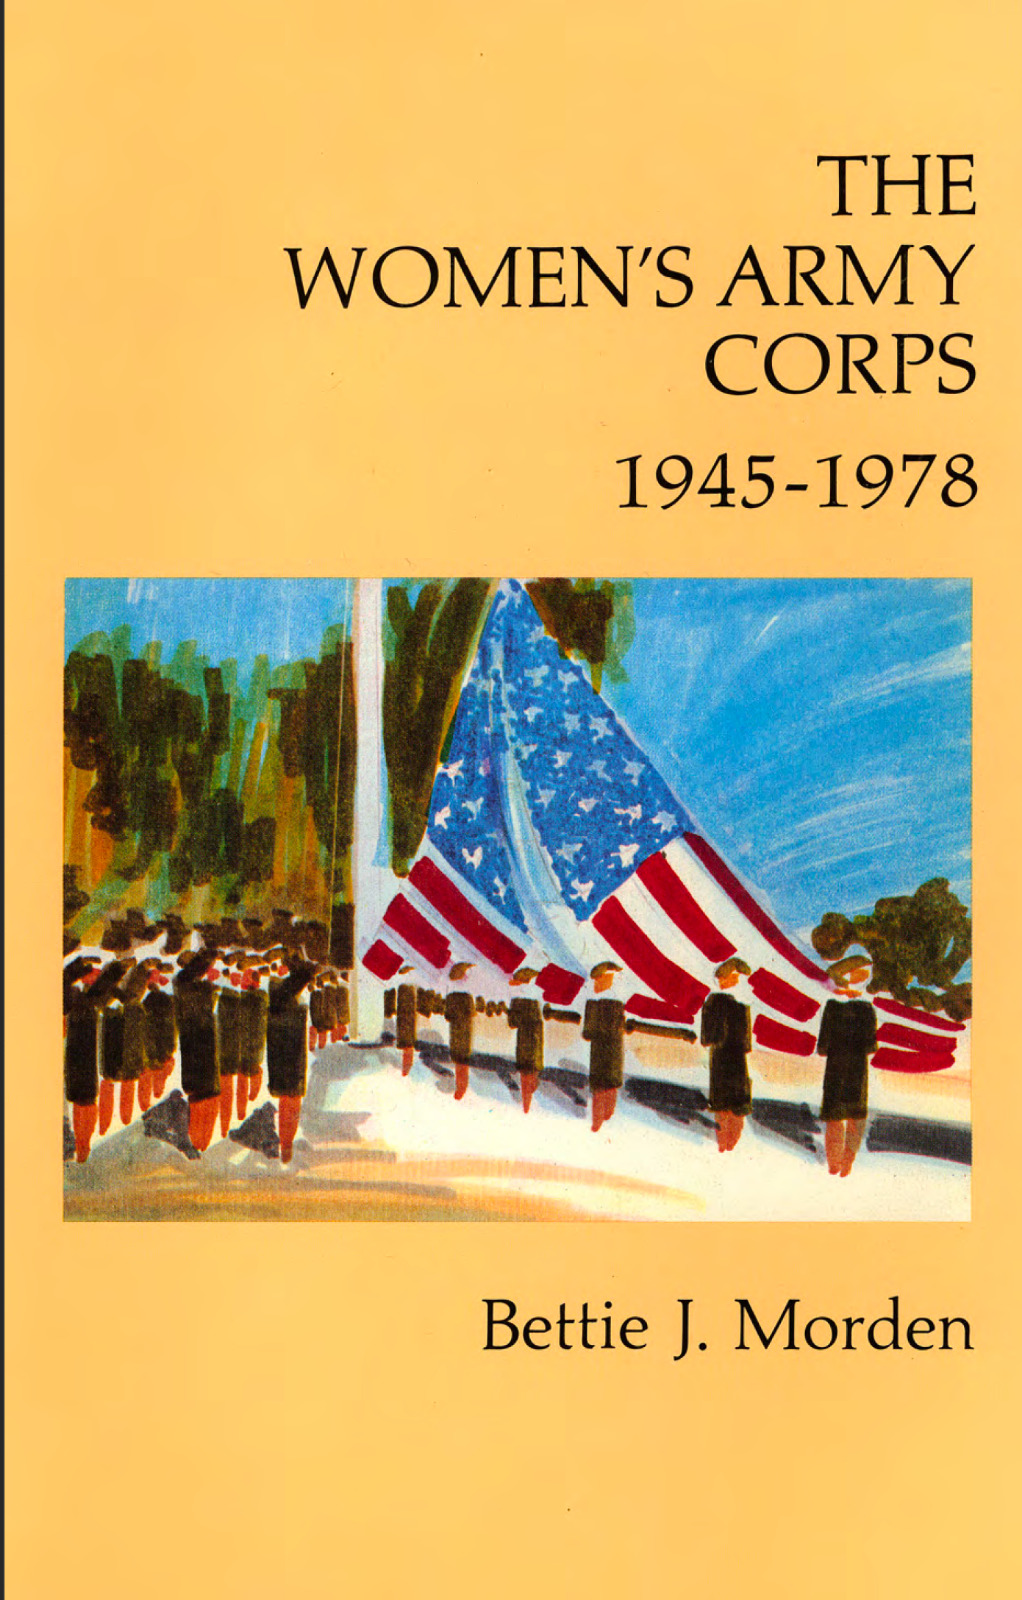 568 Page THE WOMEN'S ARMY CORPS 1945-1978 WAC WAAC History Book on Data CD